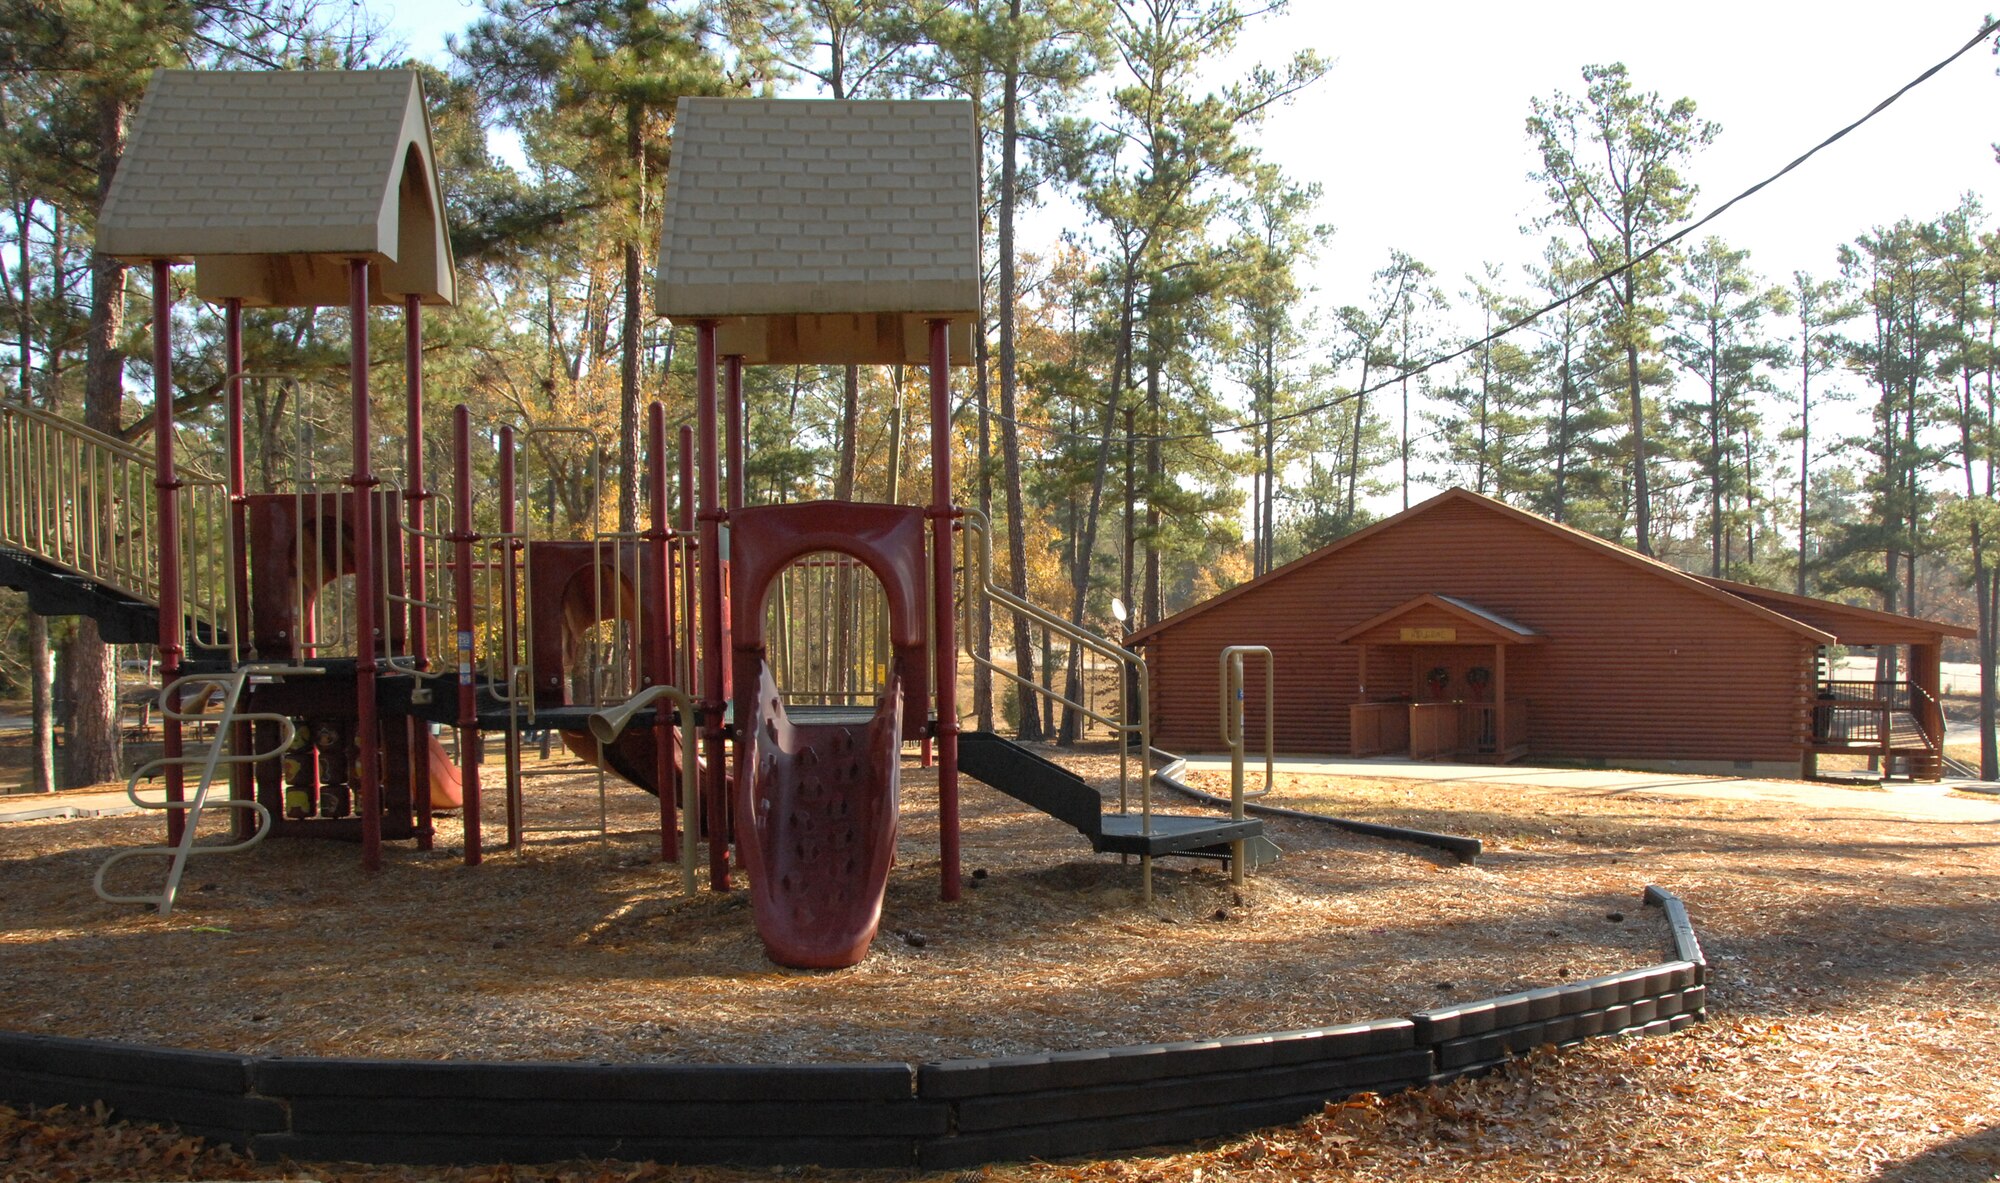 SHAW AIR FORCE BASE, S.C. -- The playground at Wateree Recreation Area is located next to the recreation hall and within sight of the surrounding cabins. This close proximity gives parents the opportunity to watch children play while still enjoying the cabin amenities. (U.S. Air Force photo/2nd Lt. Emily Chilson) 